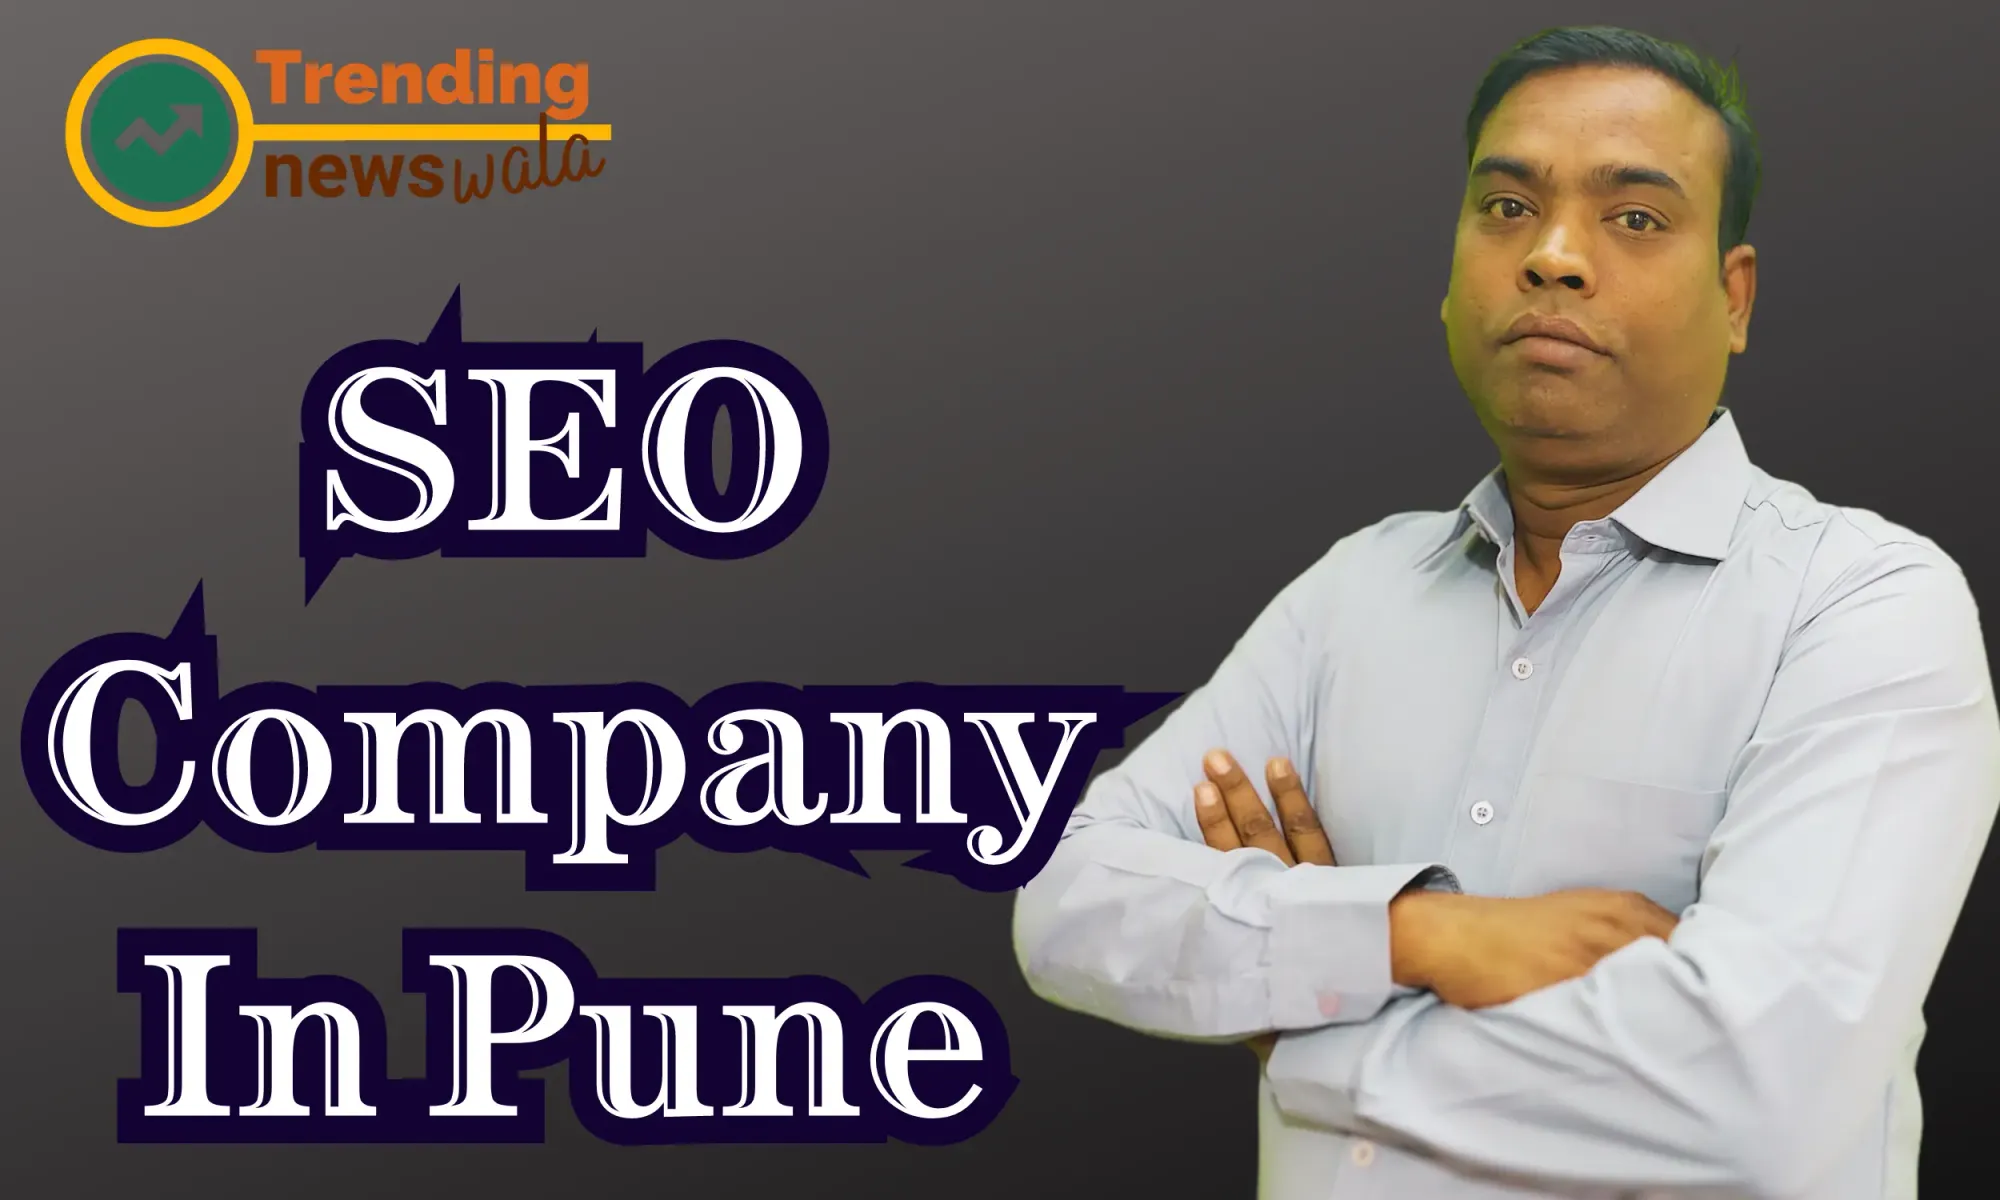 I present to you some of the SEO Company in Pune